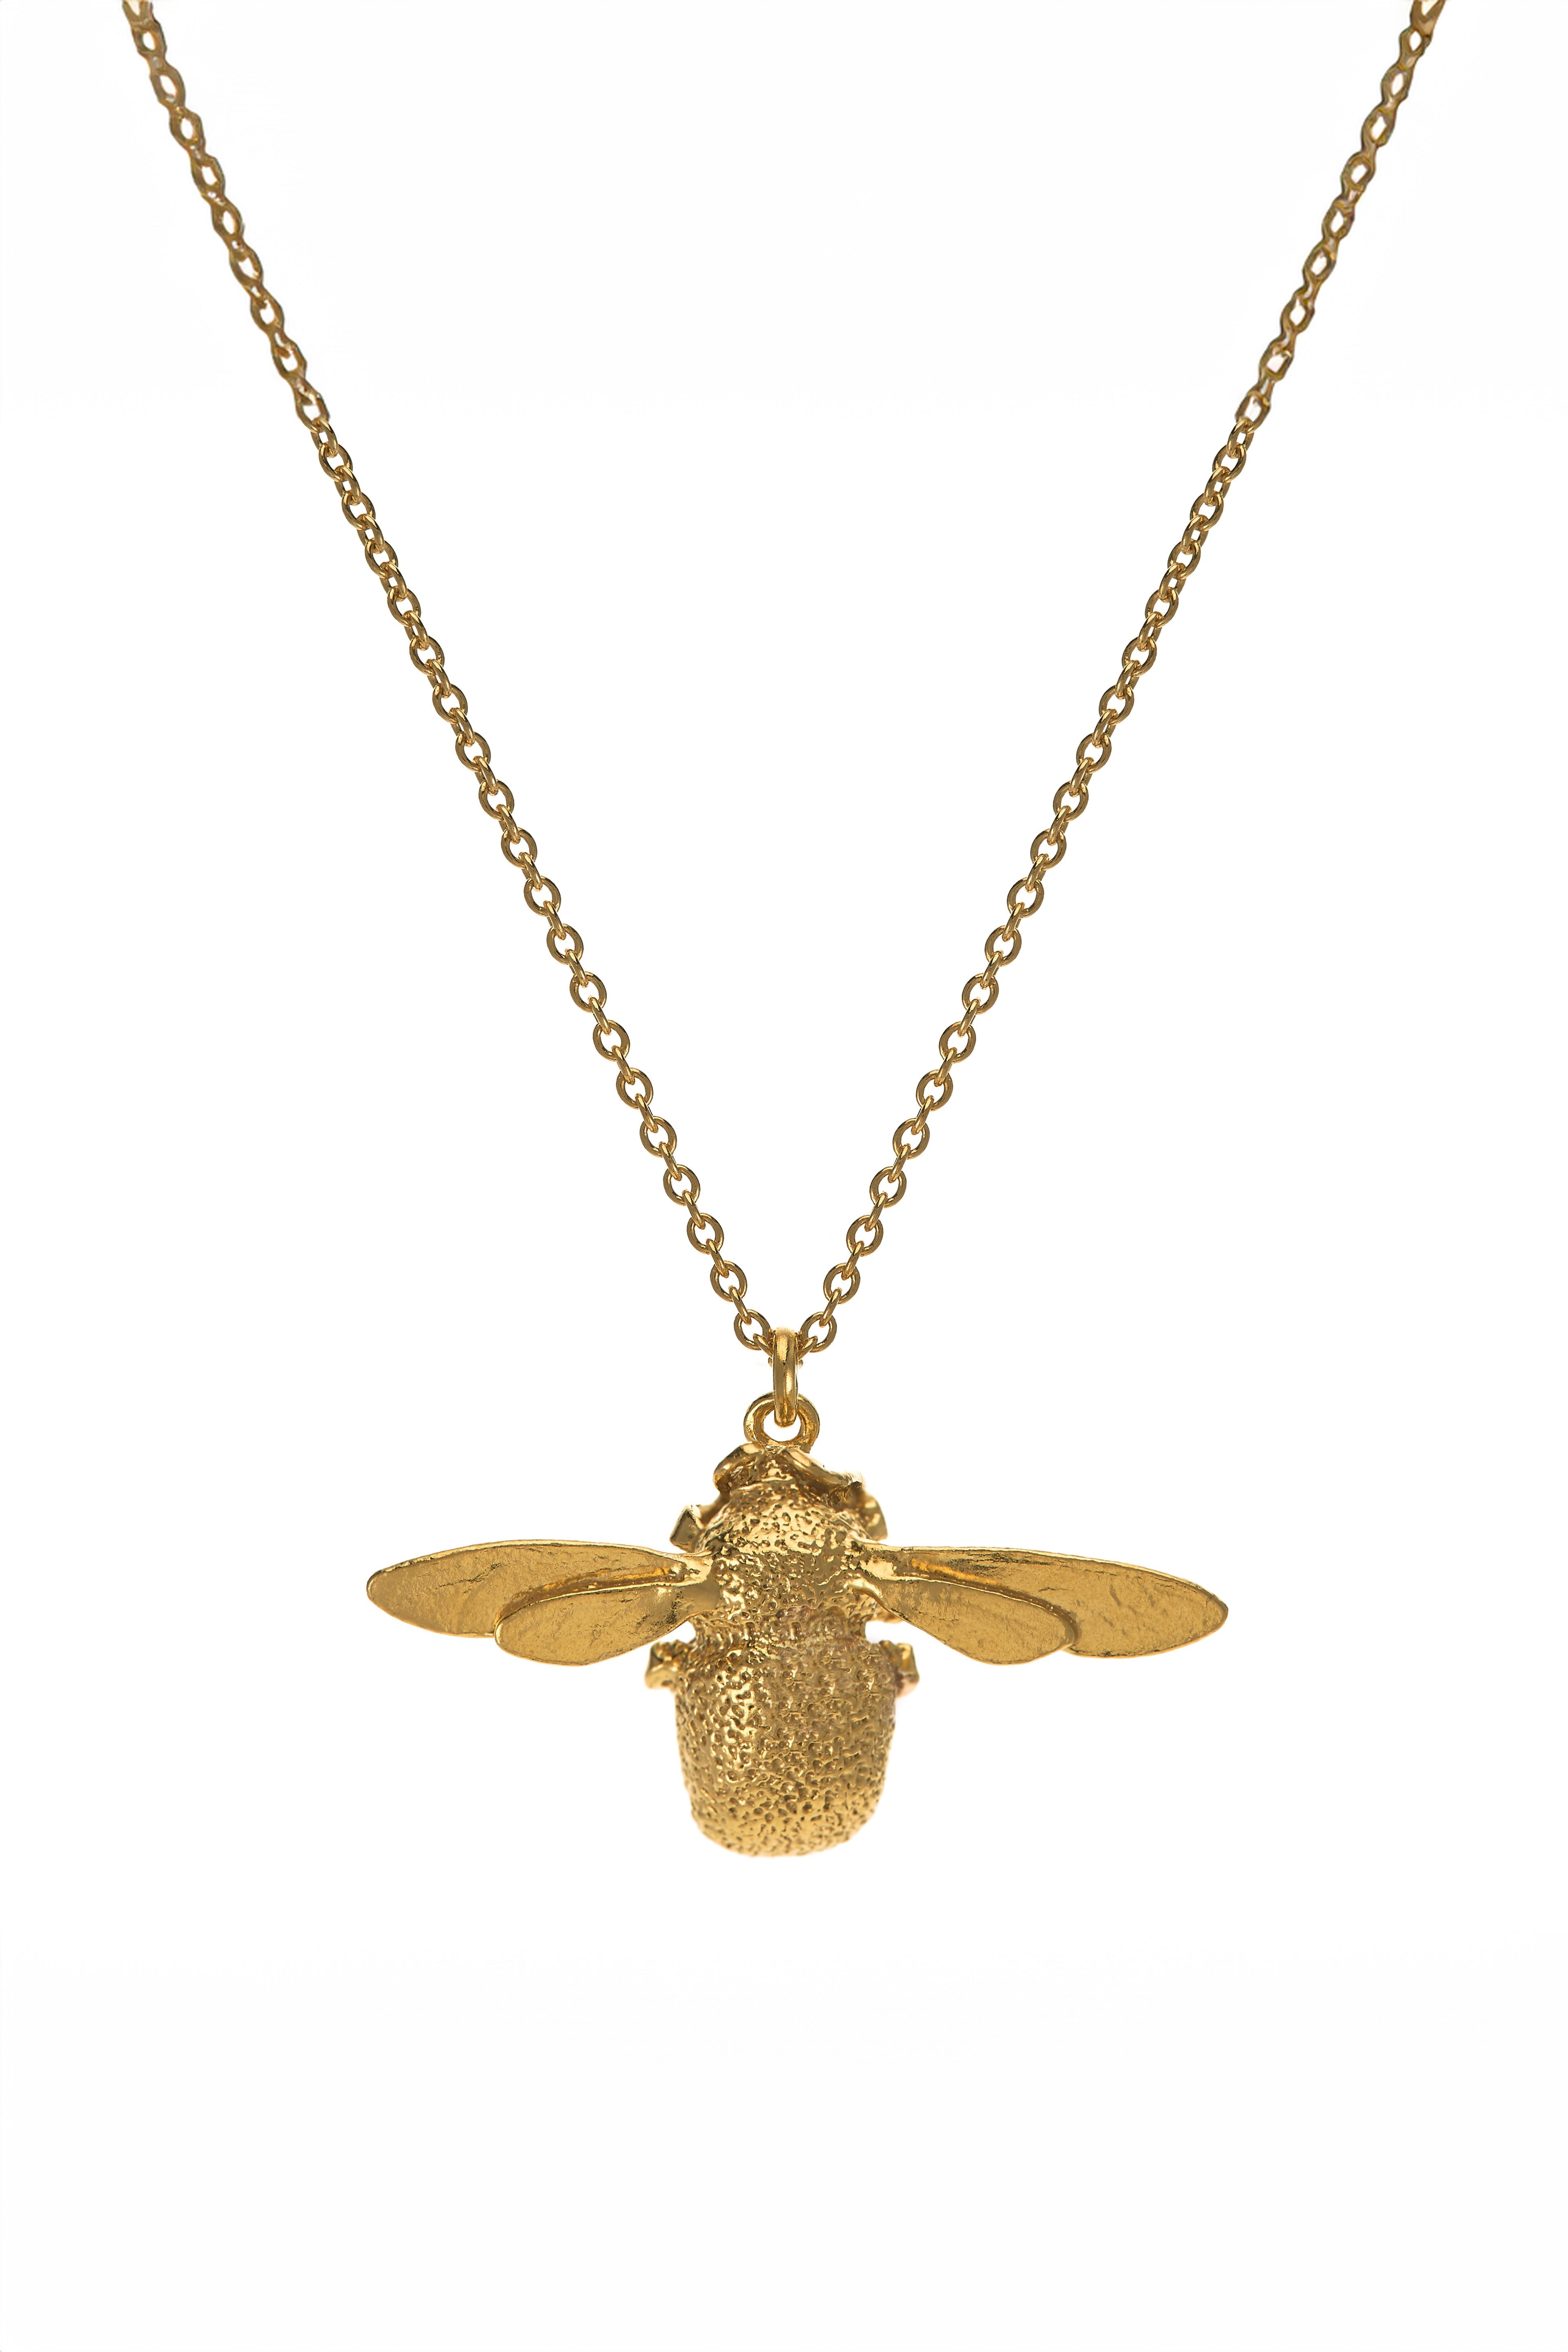 Real London Bumblebee Necklace - Golden Bumblebee Necklace